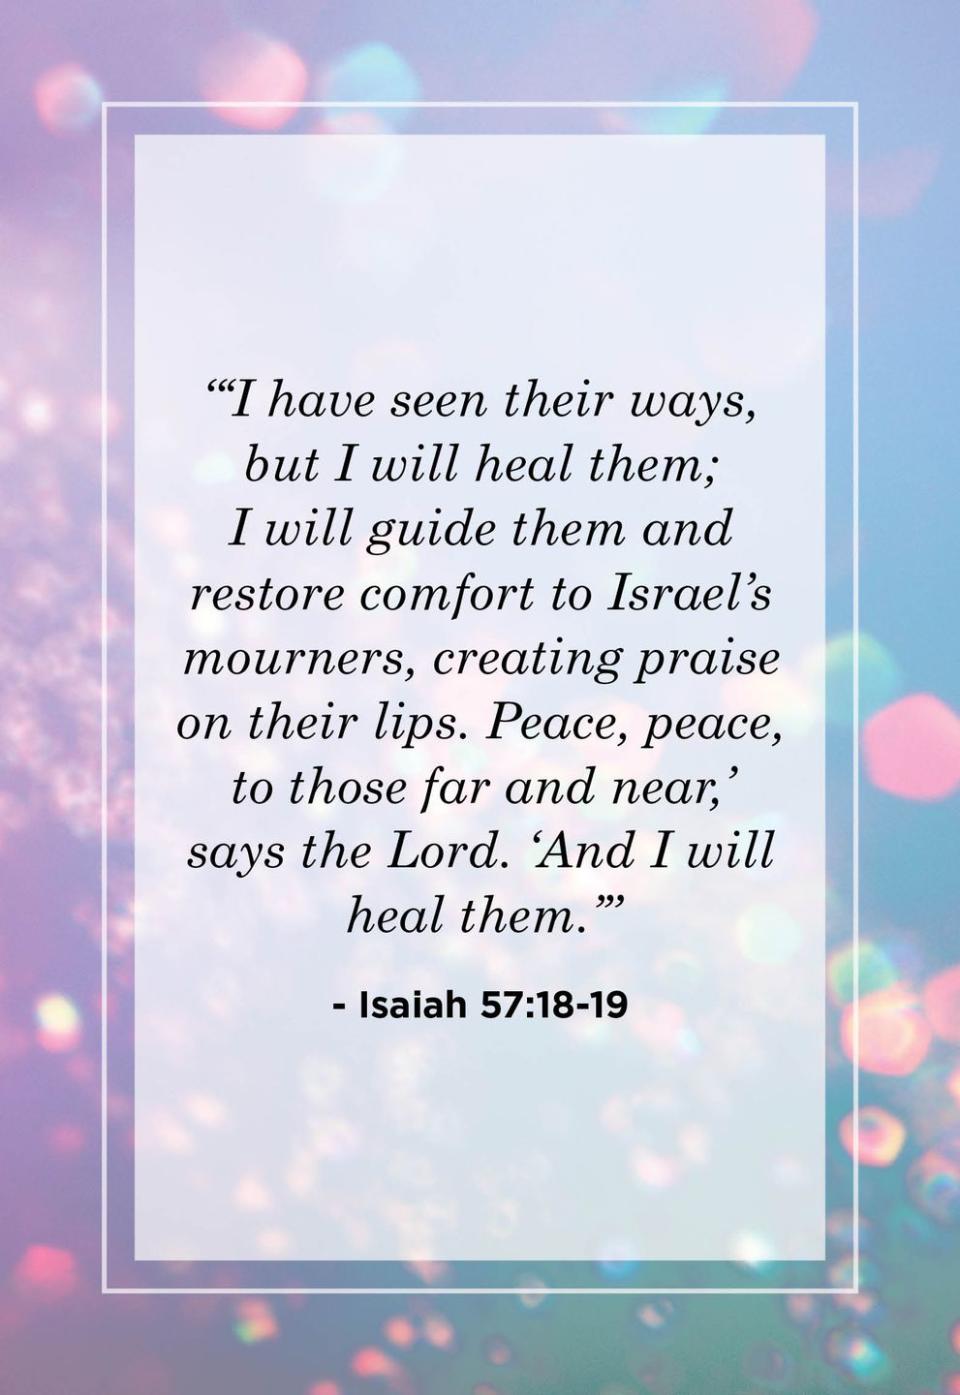 <p>"'I have seen their ways, but I will heal them; I will guide them and restore comfort to Israel's mourners, creating praise on their lips. Peace, peace, to those far and near,' says the Lord, 'And I will heal them.'"</p>